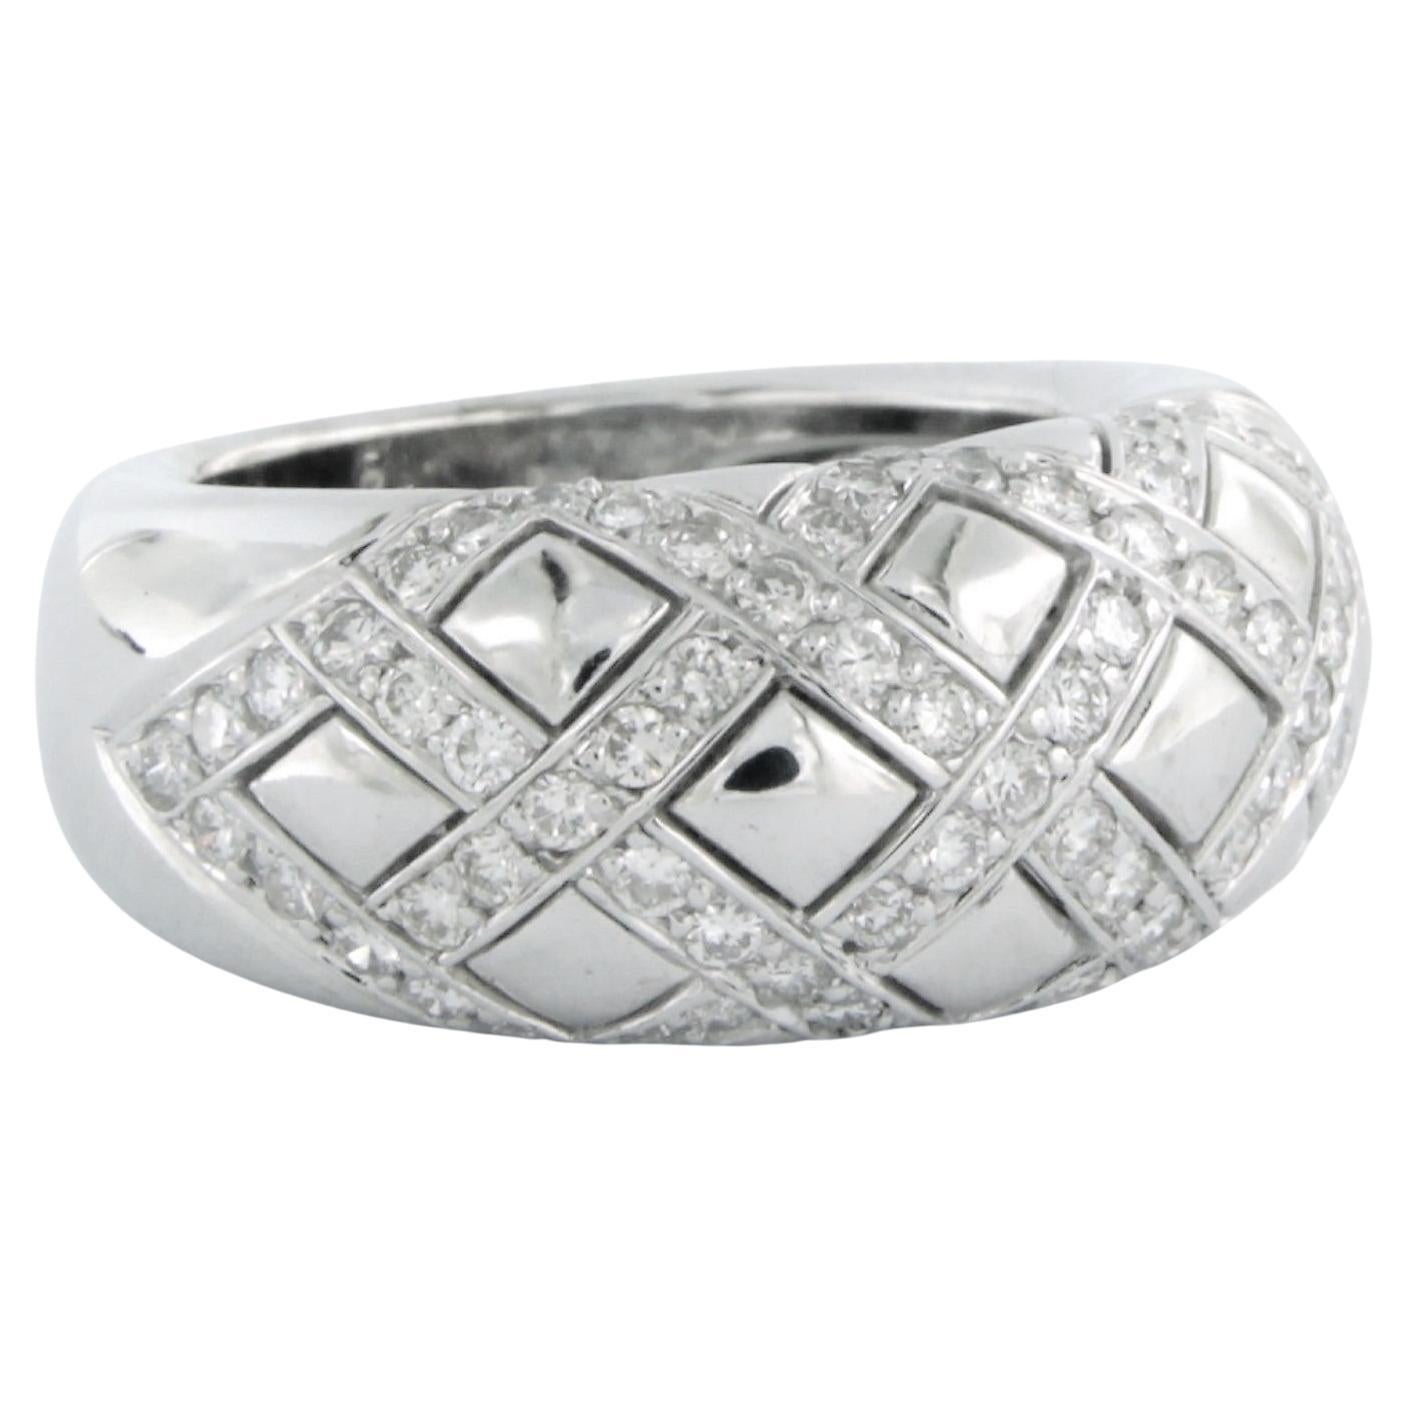 Ring with brilliant cut diamonds up to 0.70ct 18k white gold